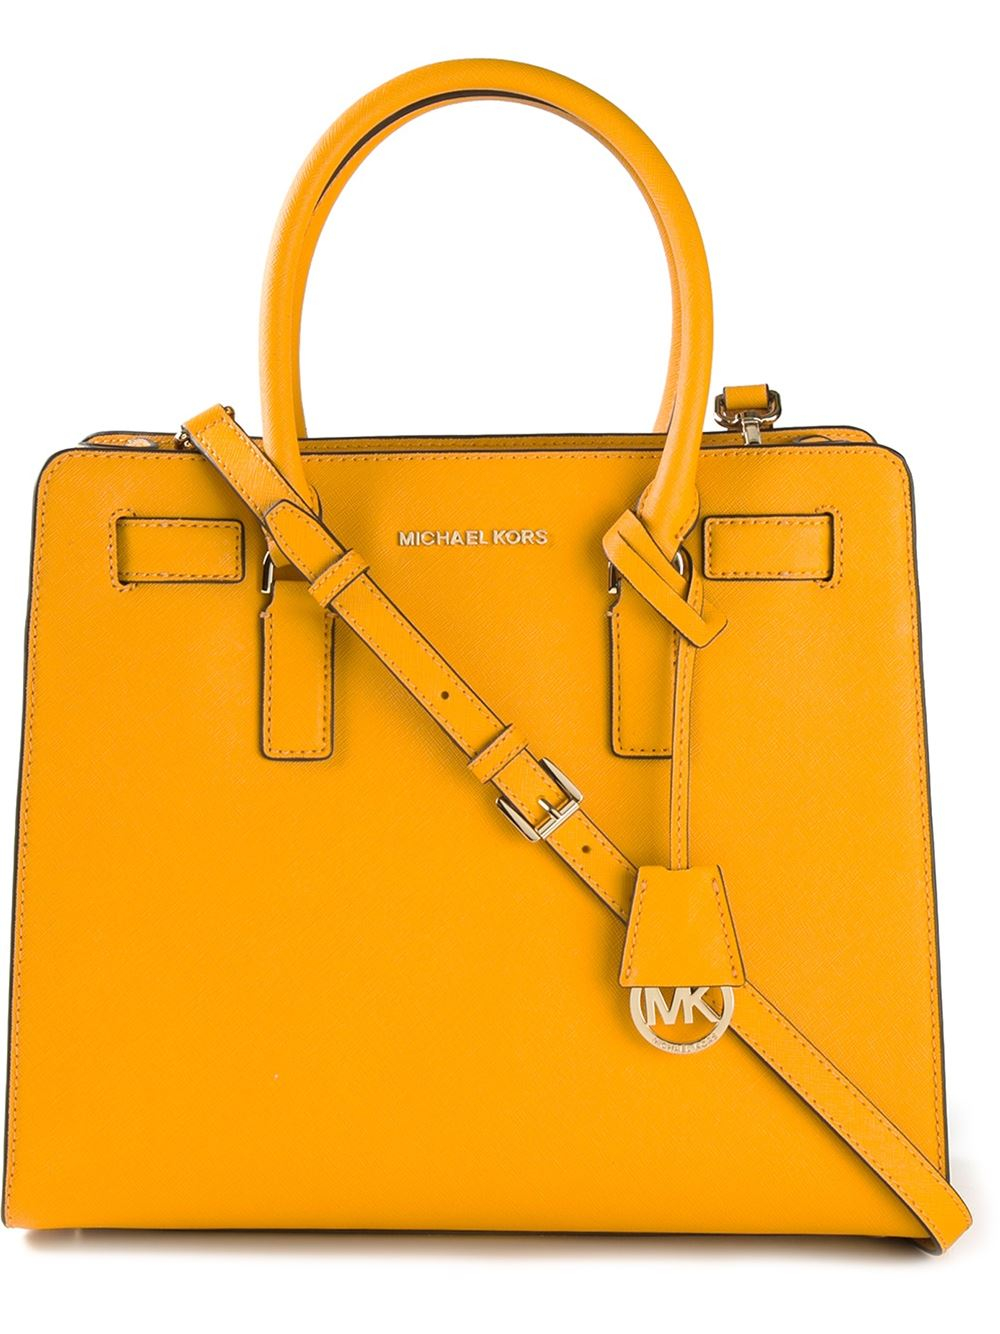 Michael michael kors 'Dillon Large Saffiano' Tote Bag in Yellow | Lyst